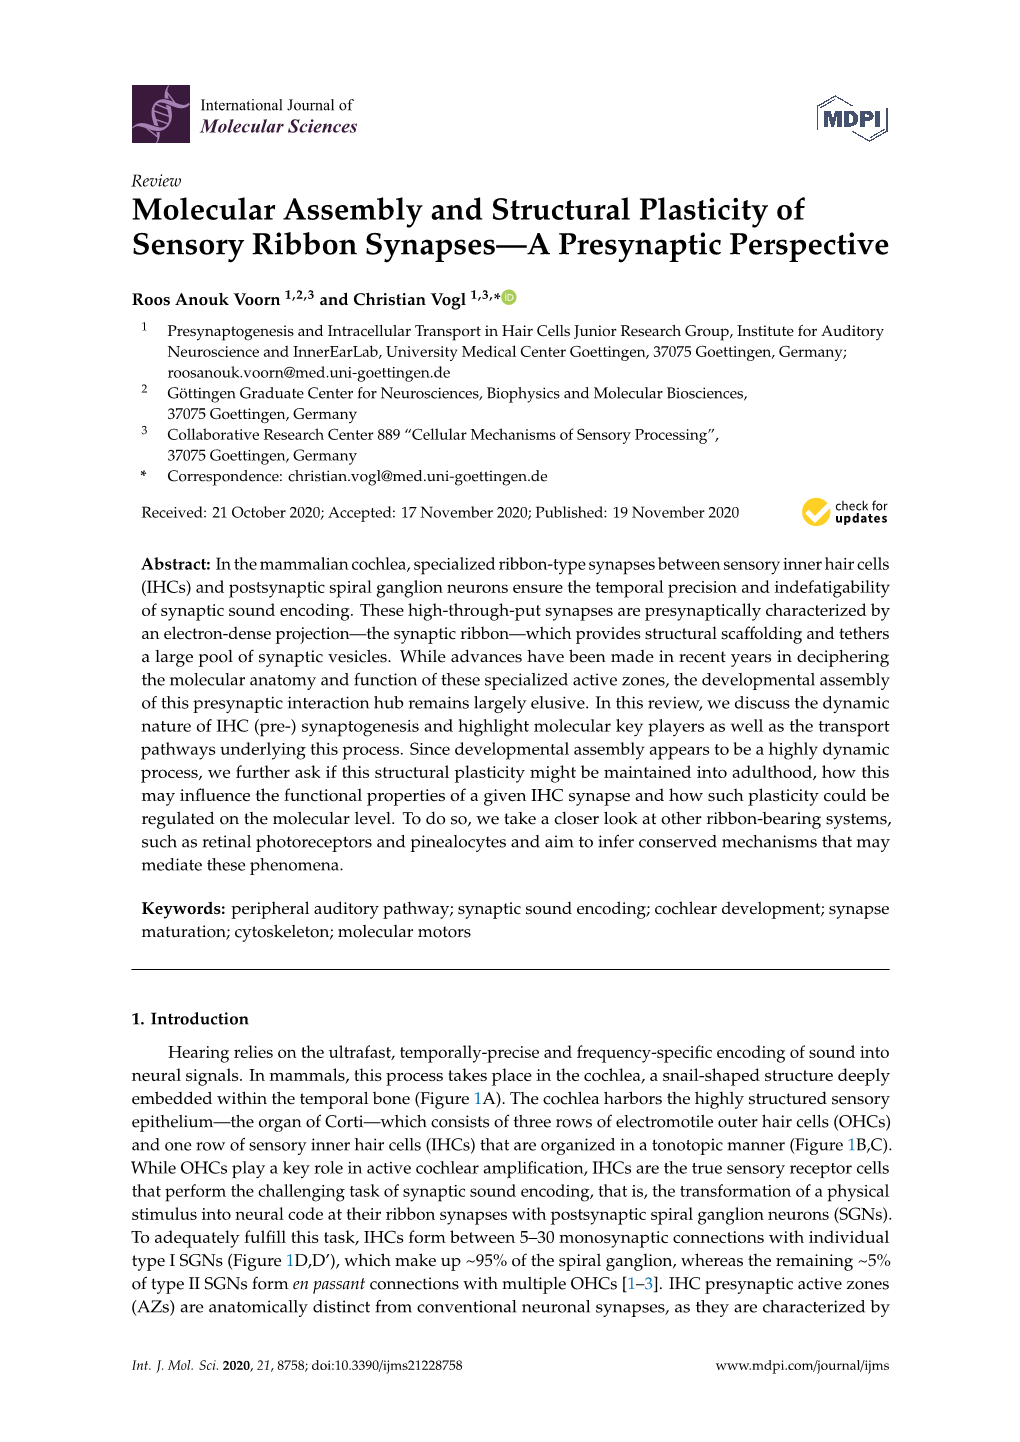 Molecular Assembly and Structural Plasticity of Sensory Ribbon Synapses—A Presynaptic Perspective